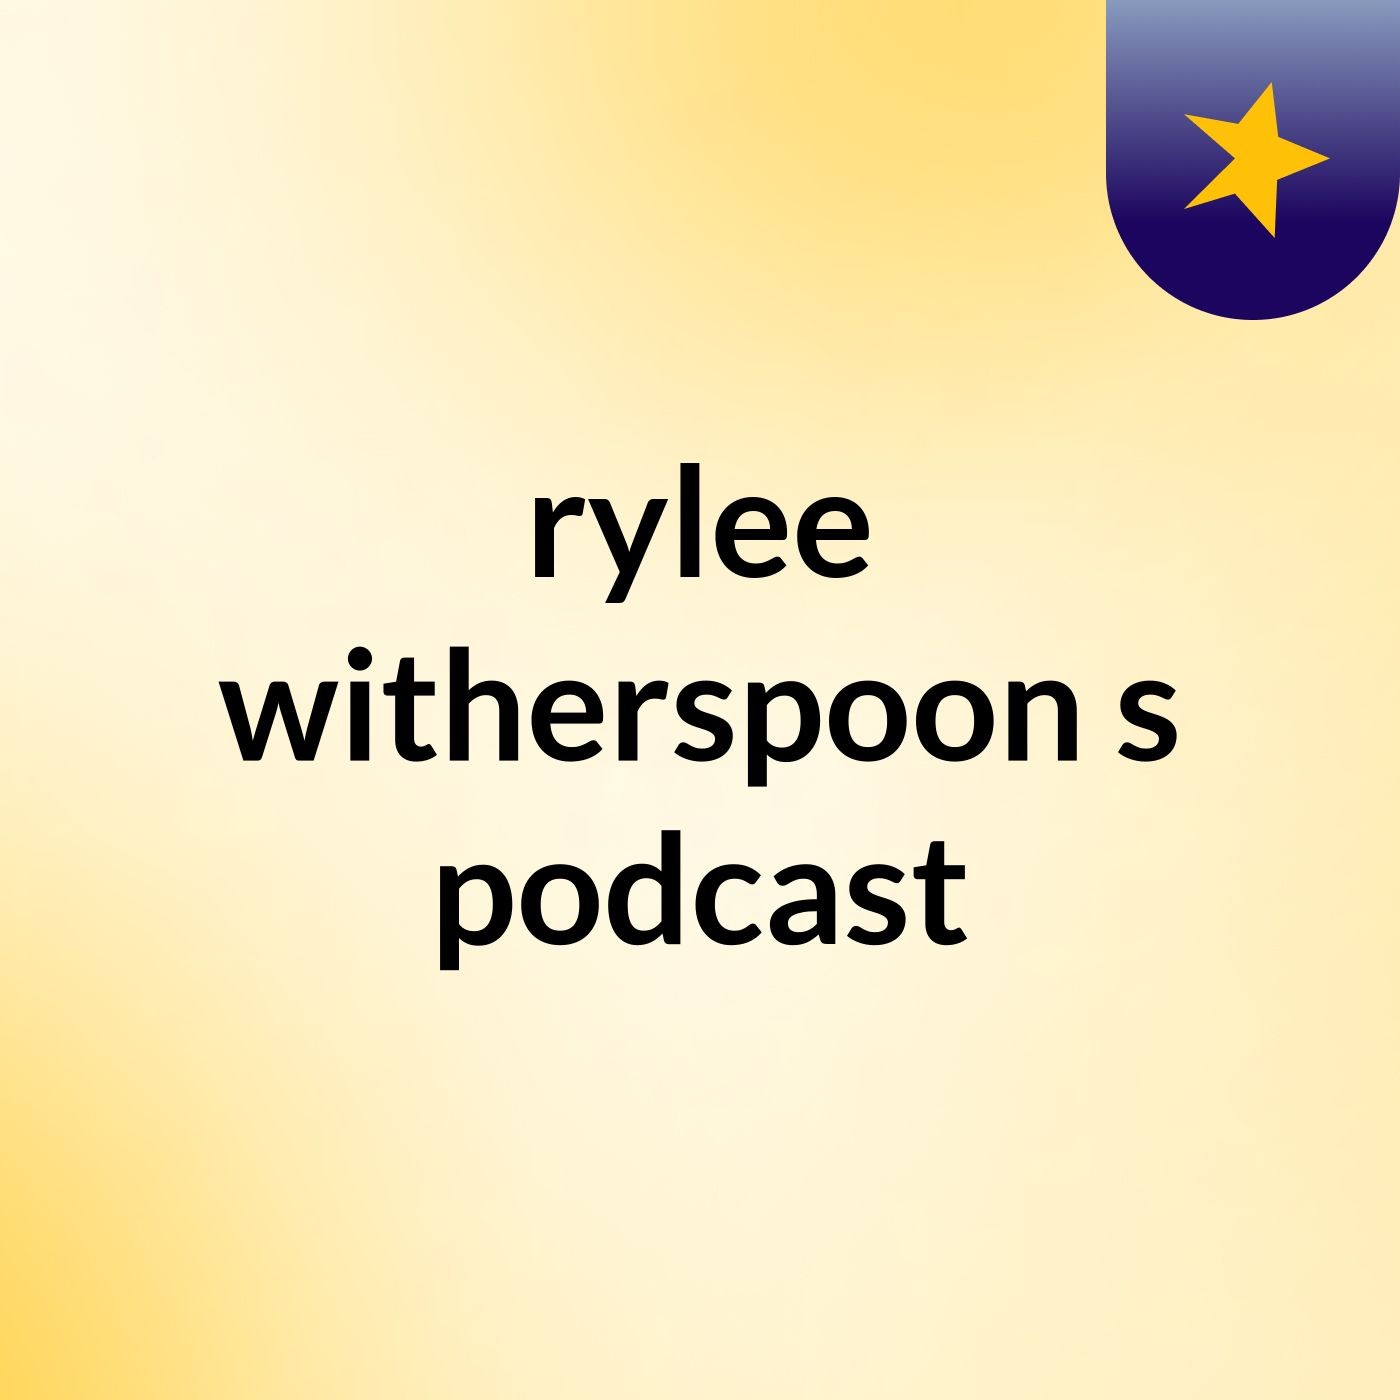 rylee witherspoon's podcast